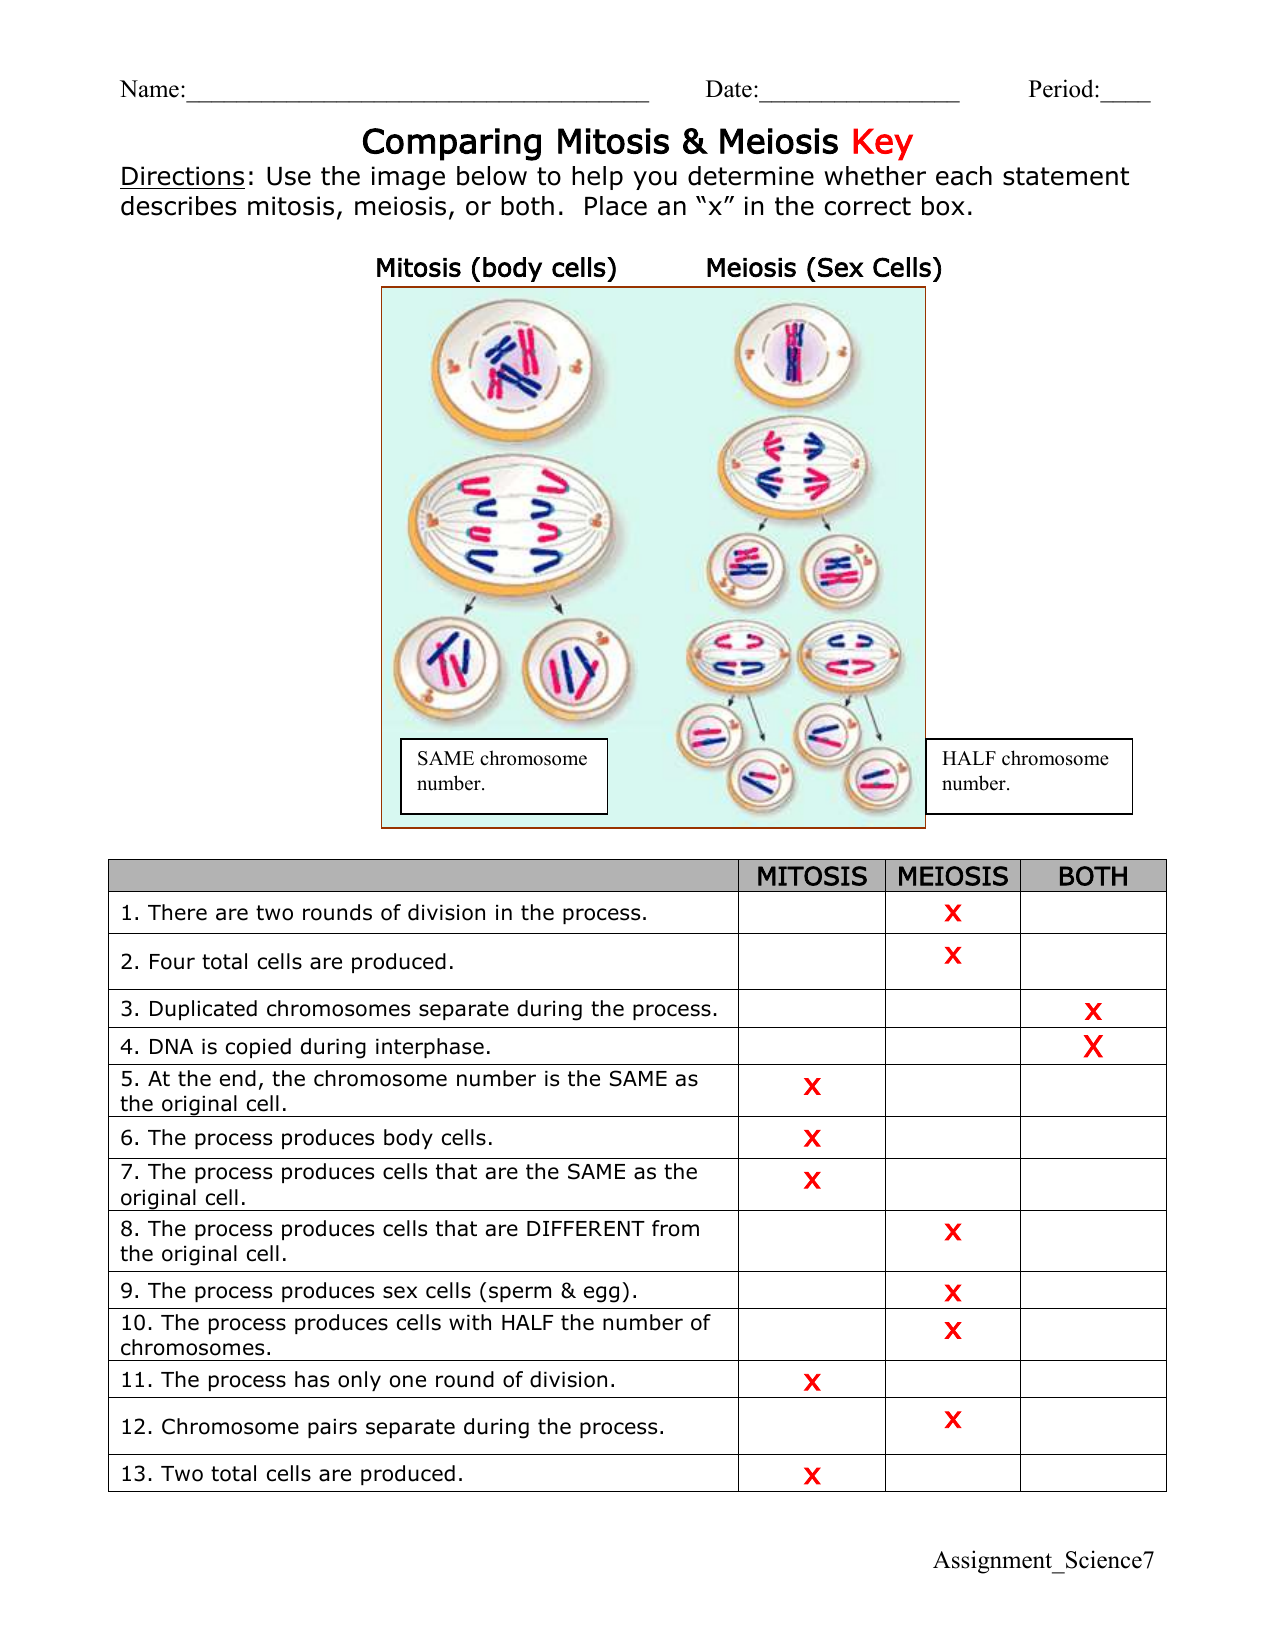 comparing-mitosis-and-meiosis-difference-between-mitosis-and-meiosis